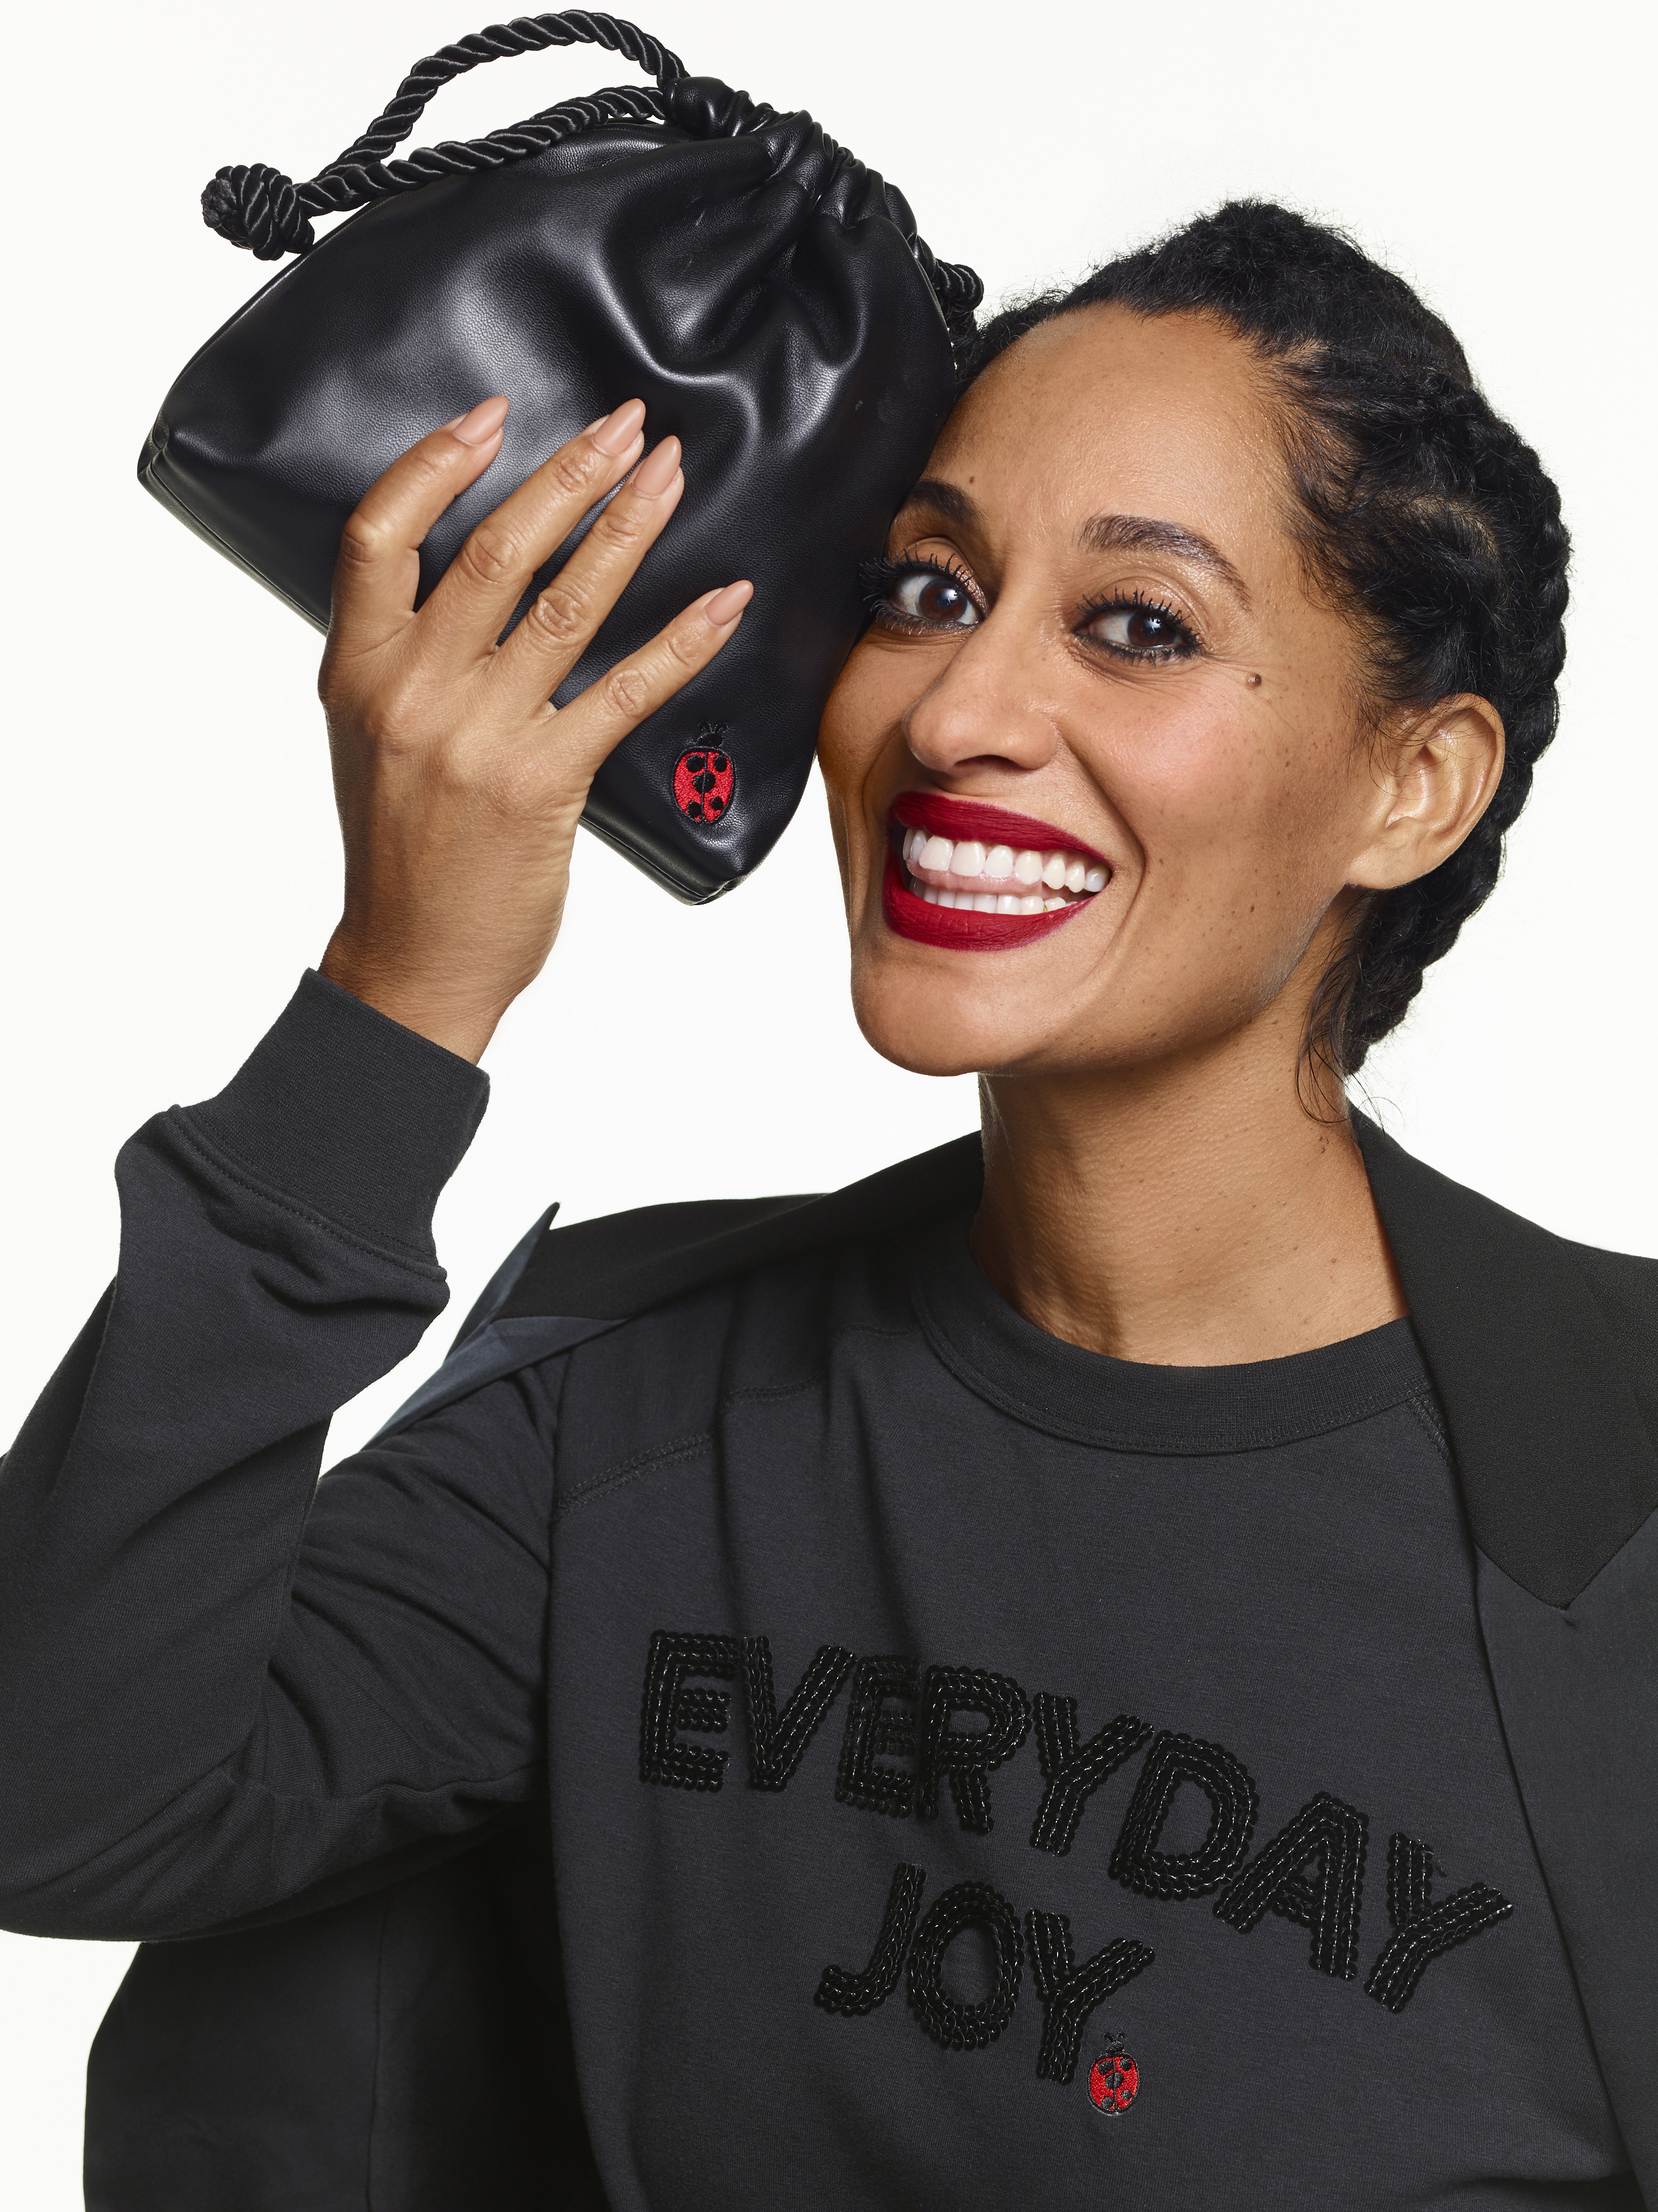 TRACEE ELLIS ROSS’ HOLIDAY COLLABORATION WITH JCPENNEY